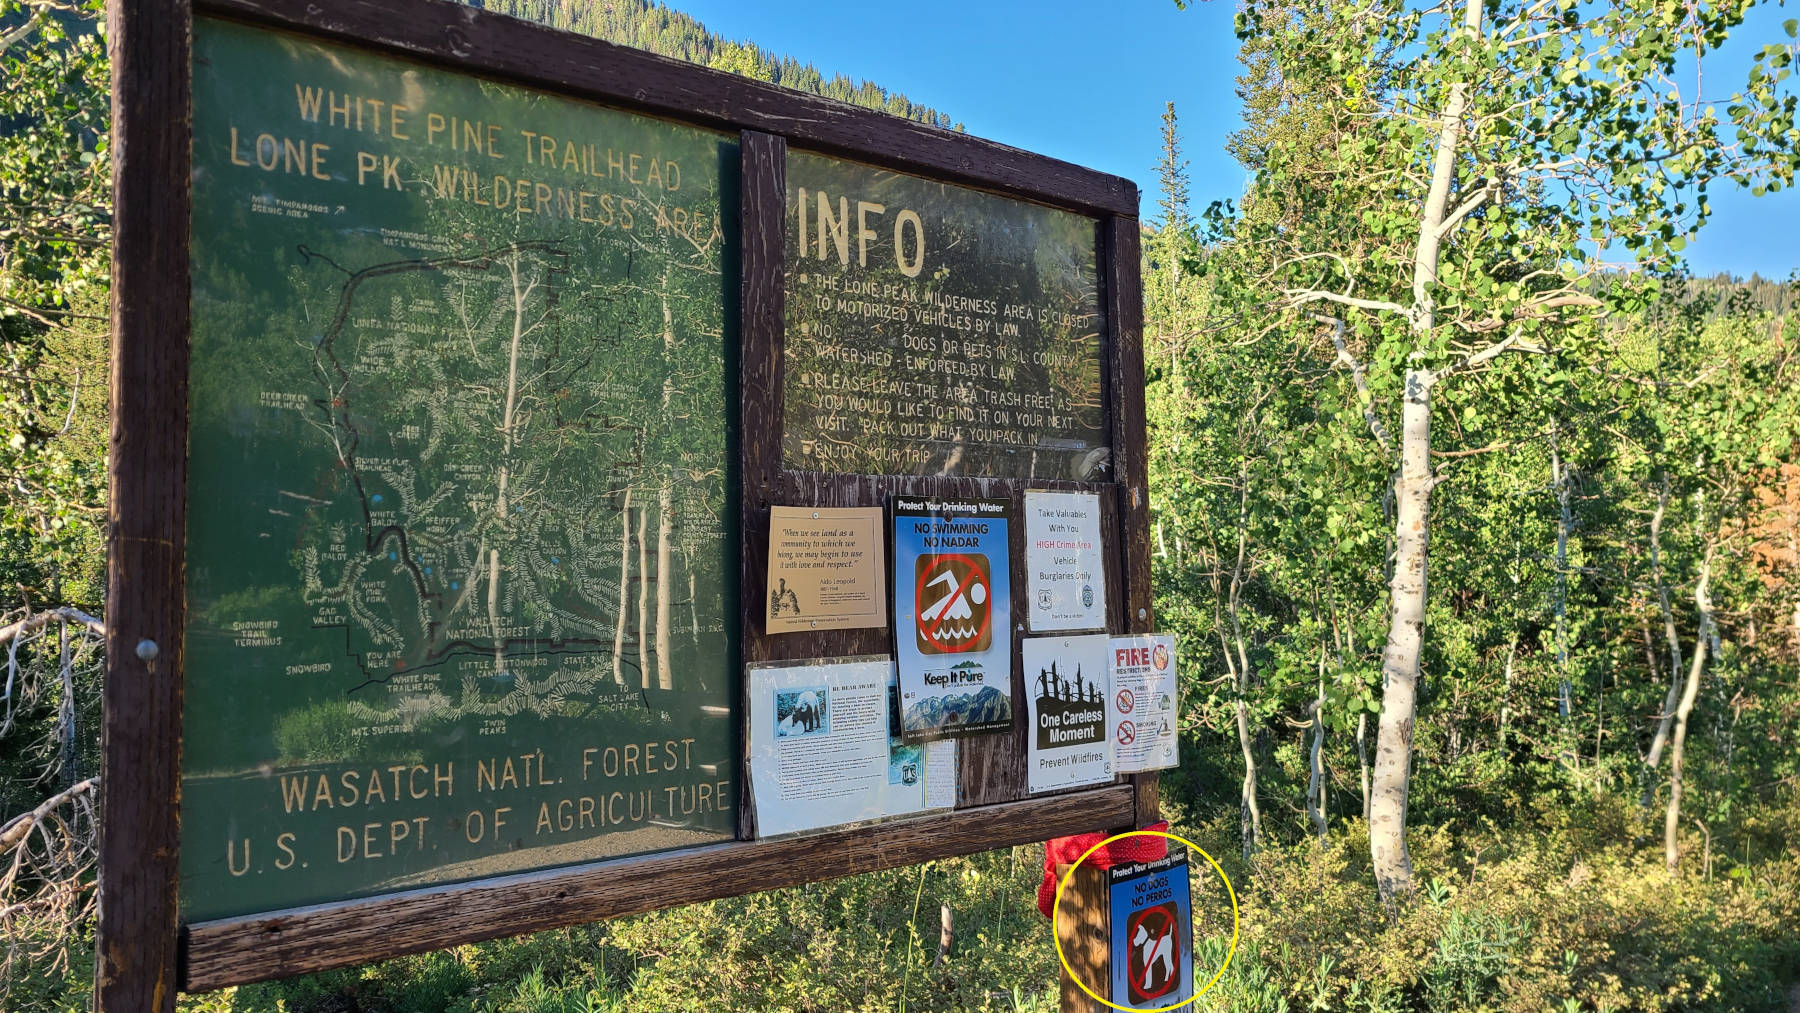 Read all trailhead information before starting your hike